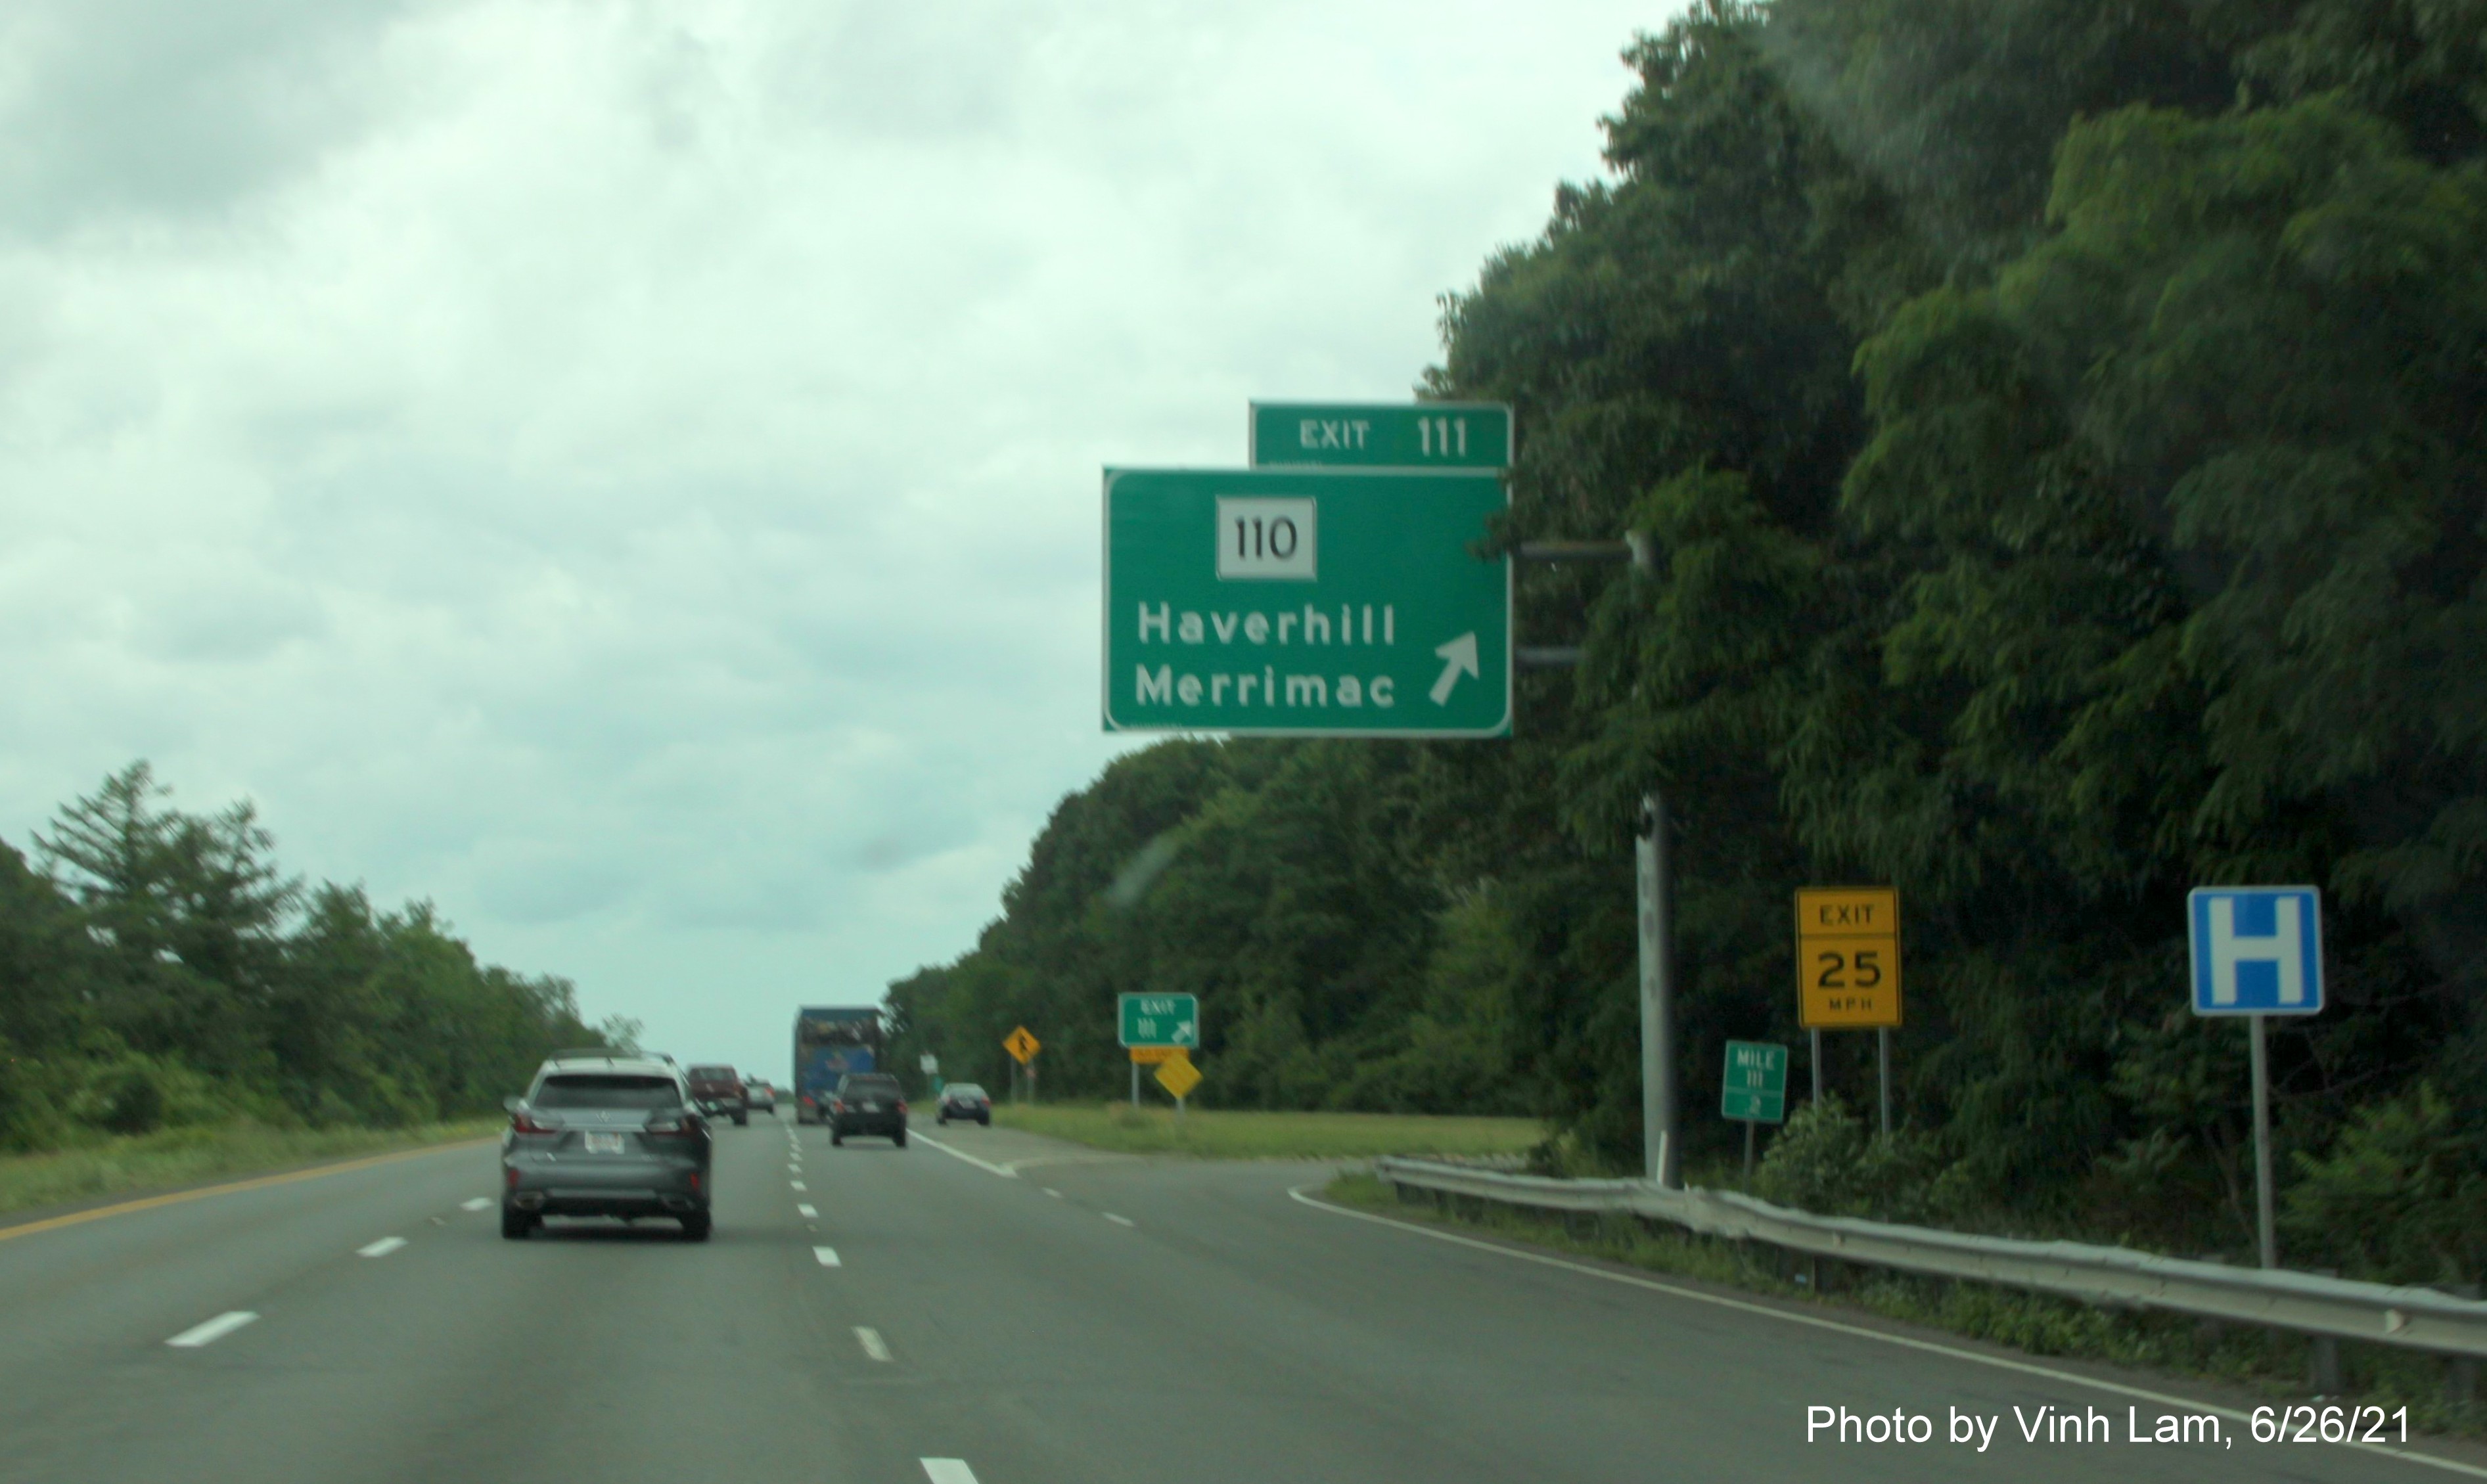 Image of overhead ramp sign for MA 110 exit with new milepost based exit number on I-495 South in Haverhill, photo by Vinh Lam, June 2021